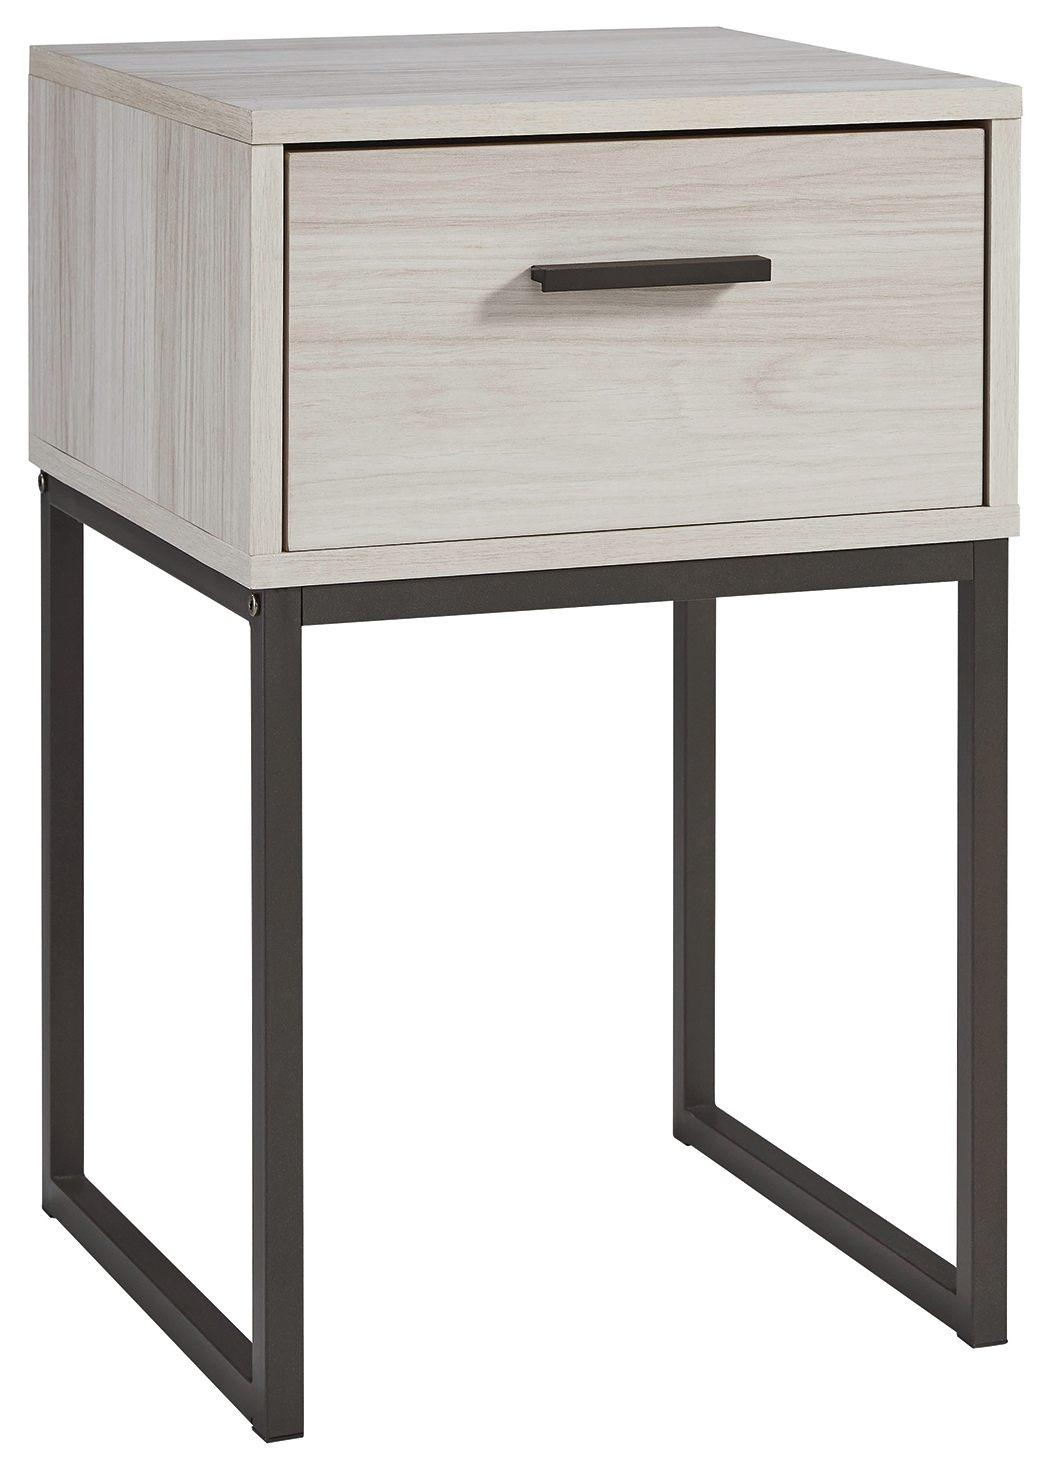 Socalle - Light Natural - One Drawer Night Stand - Vinyl-Wrapped Tony's Home Furnishings Furniture. Beds. Dressers. Sofas.